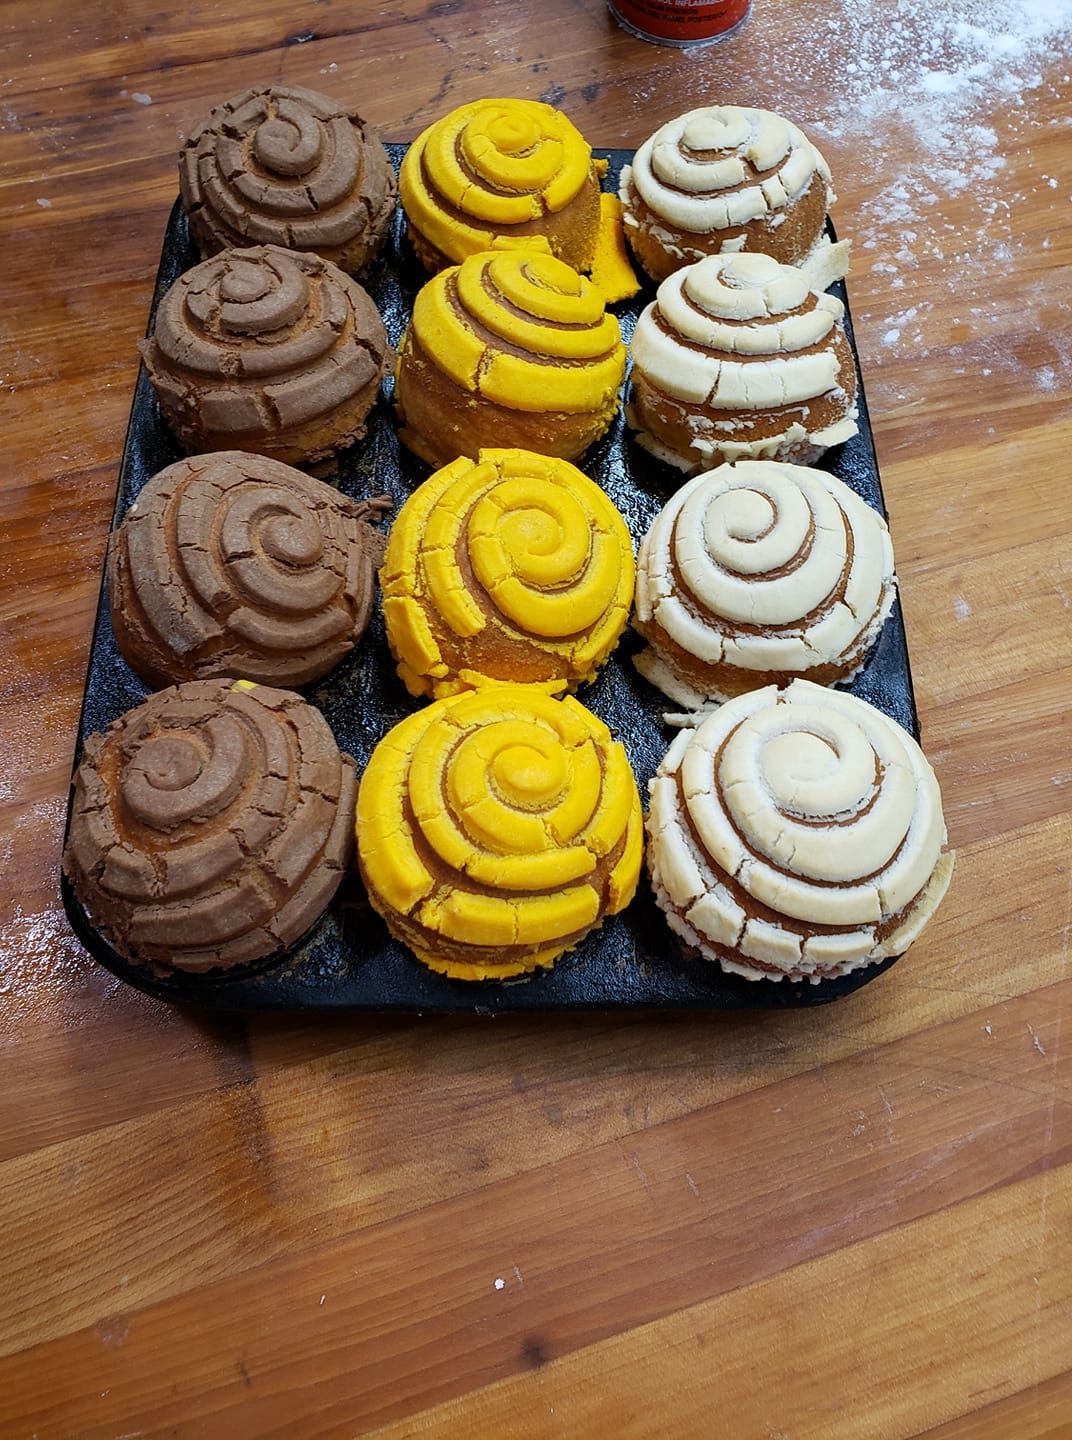 Color photo of concha pastries